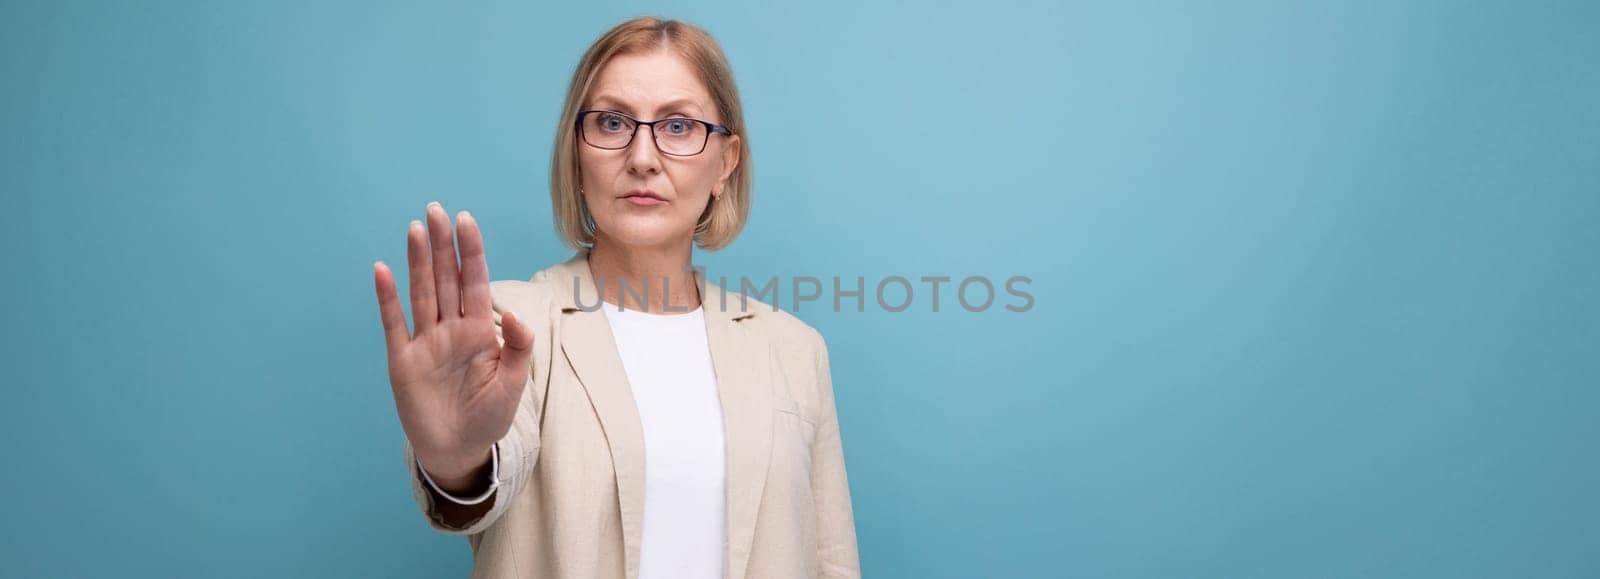 middle-aged woman business serious on bright studio background with copy space by TRMK